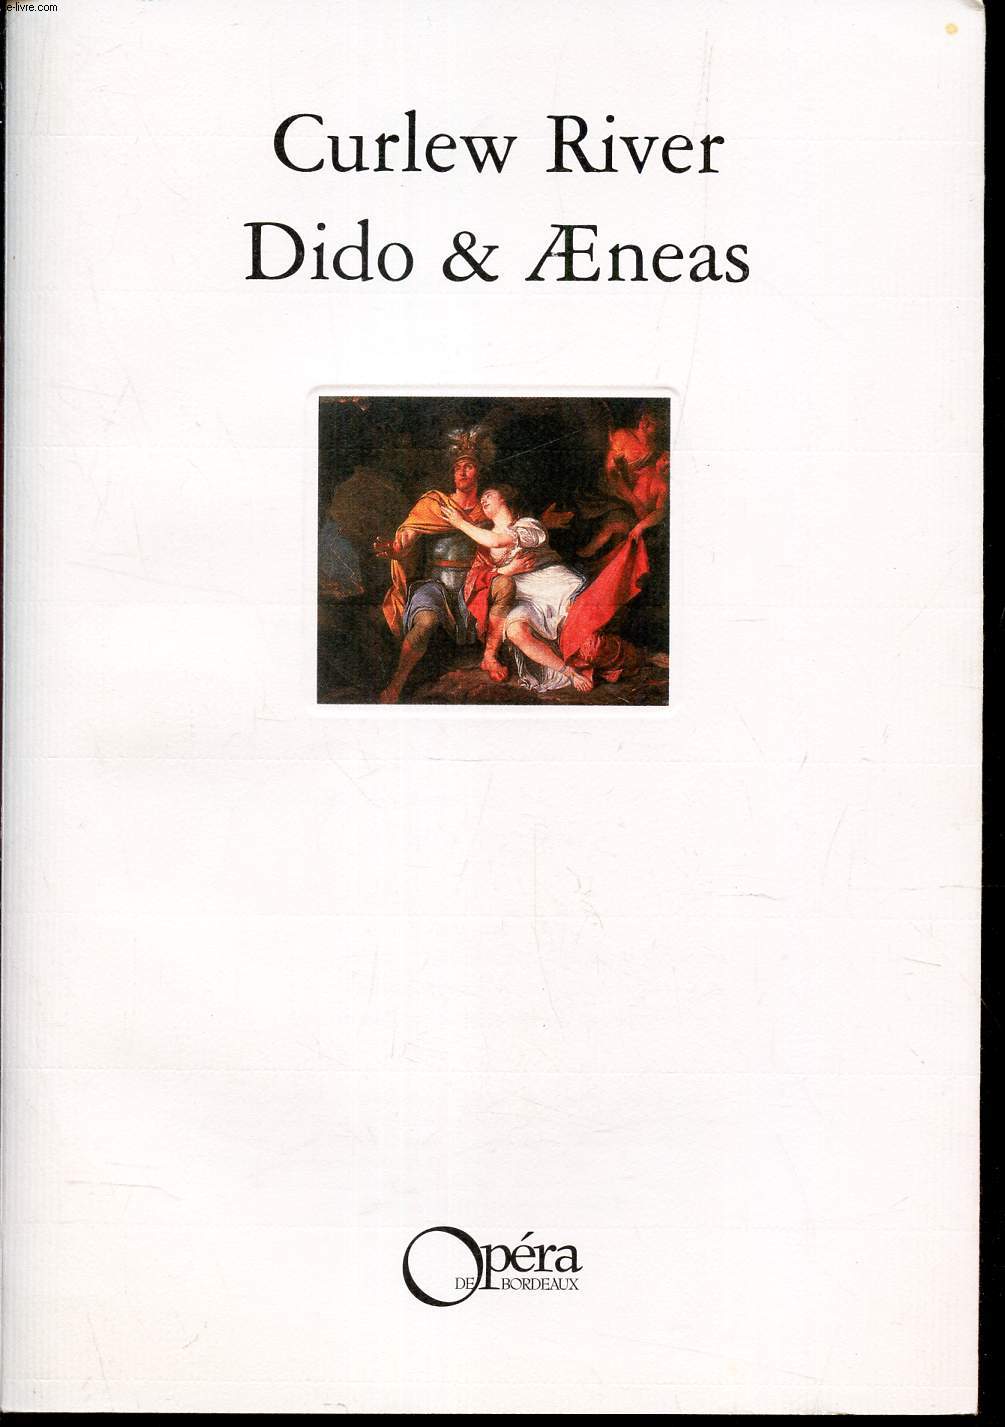 CURLEW RIVER - BRITTEN / DIDO & AENEAS - PURCELL / N51